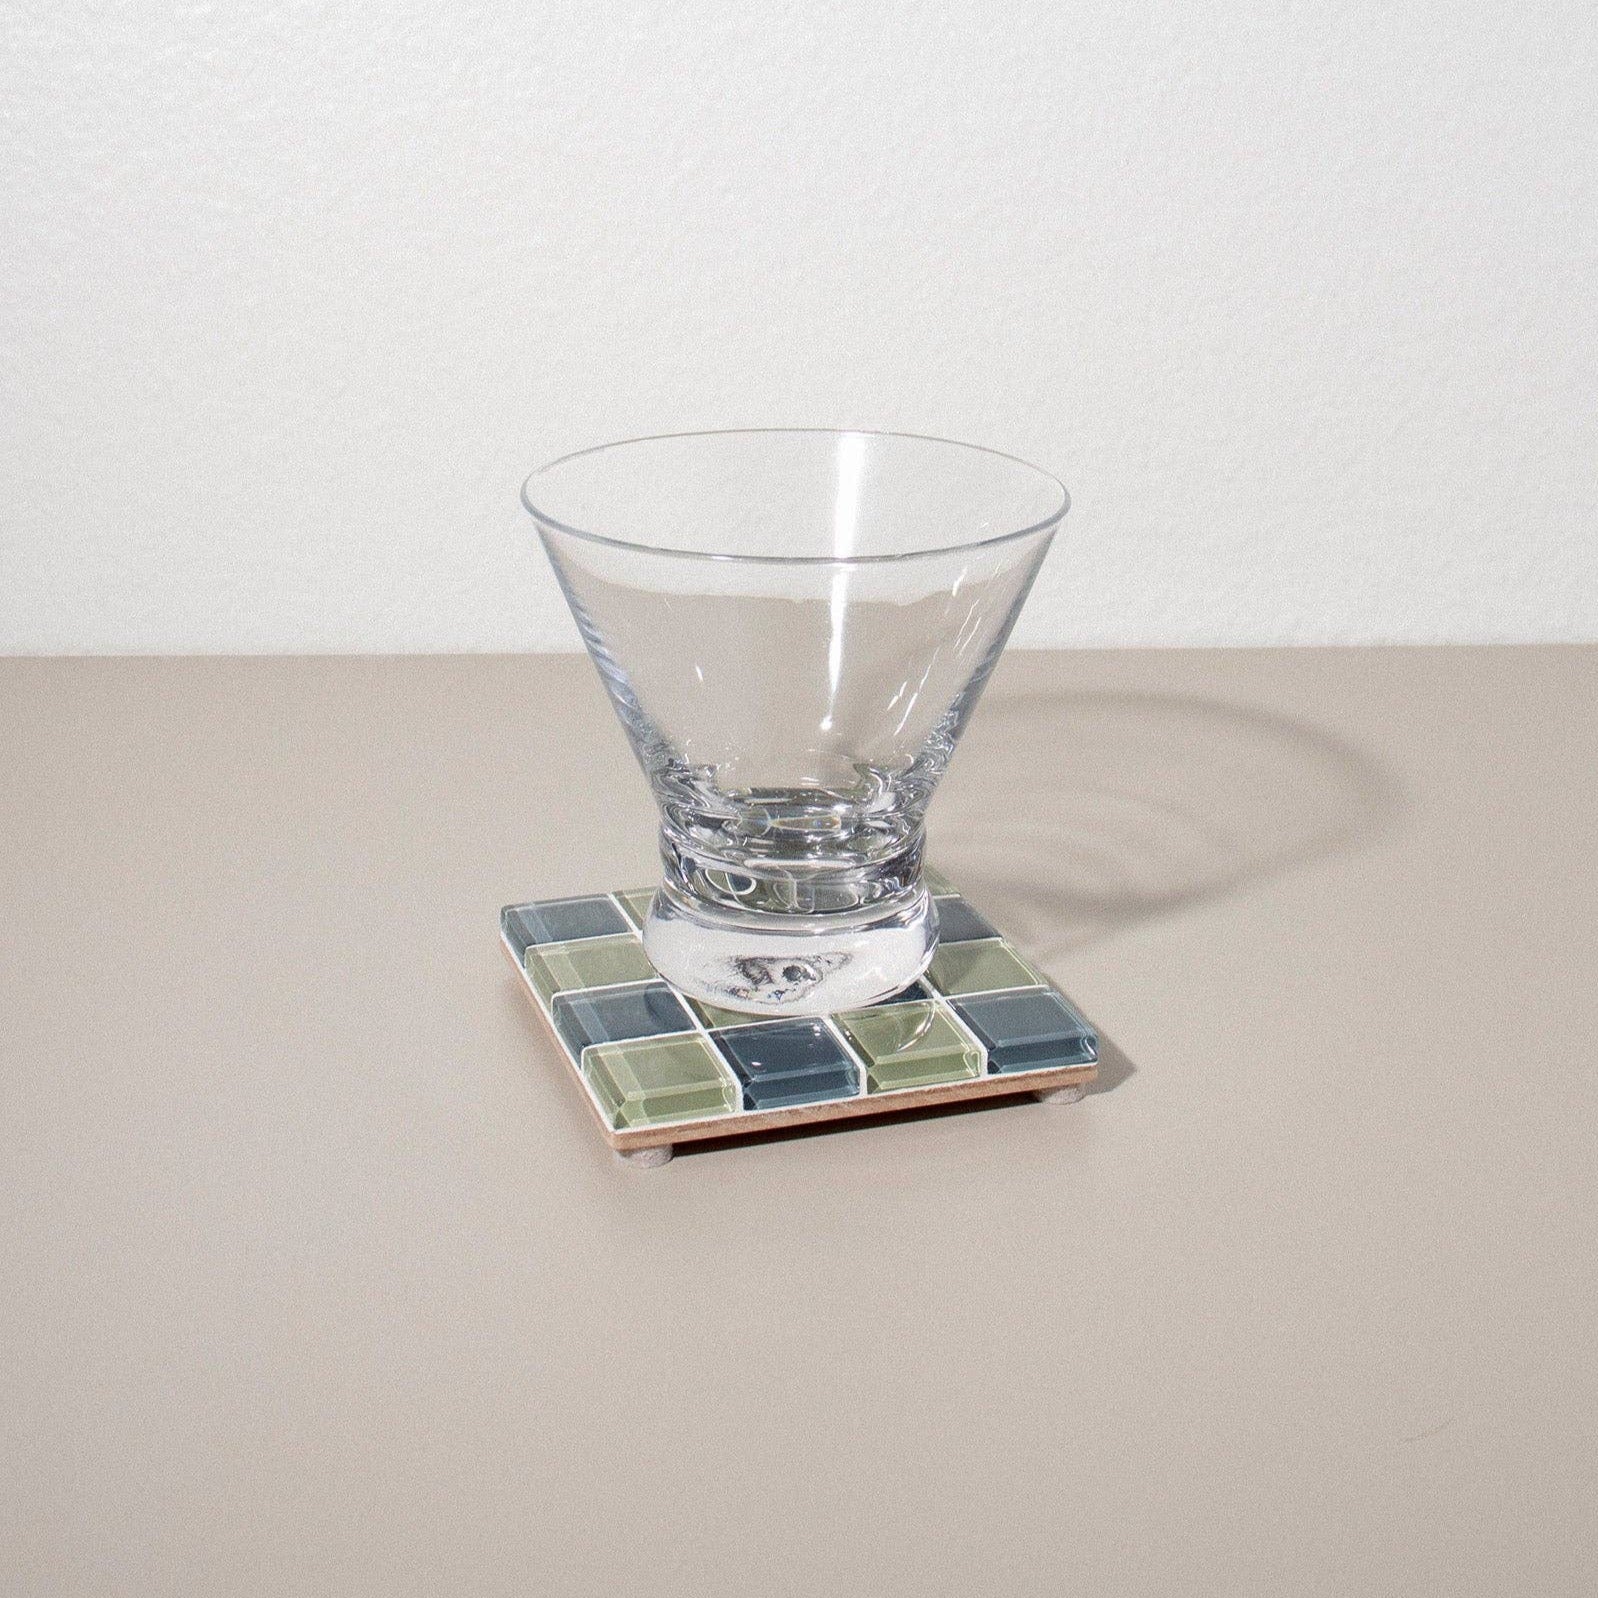 GLASS TILE COASTER - Dusted Moss: Single by Subtle Art Studios